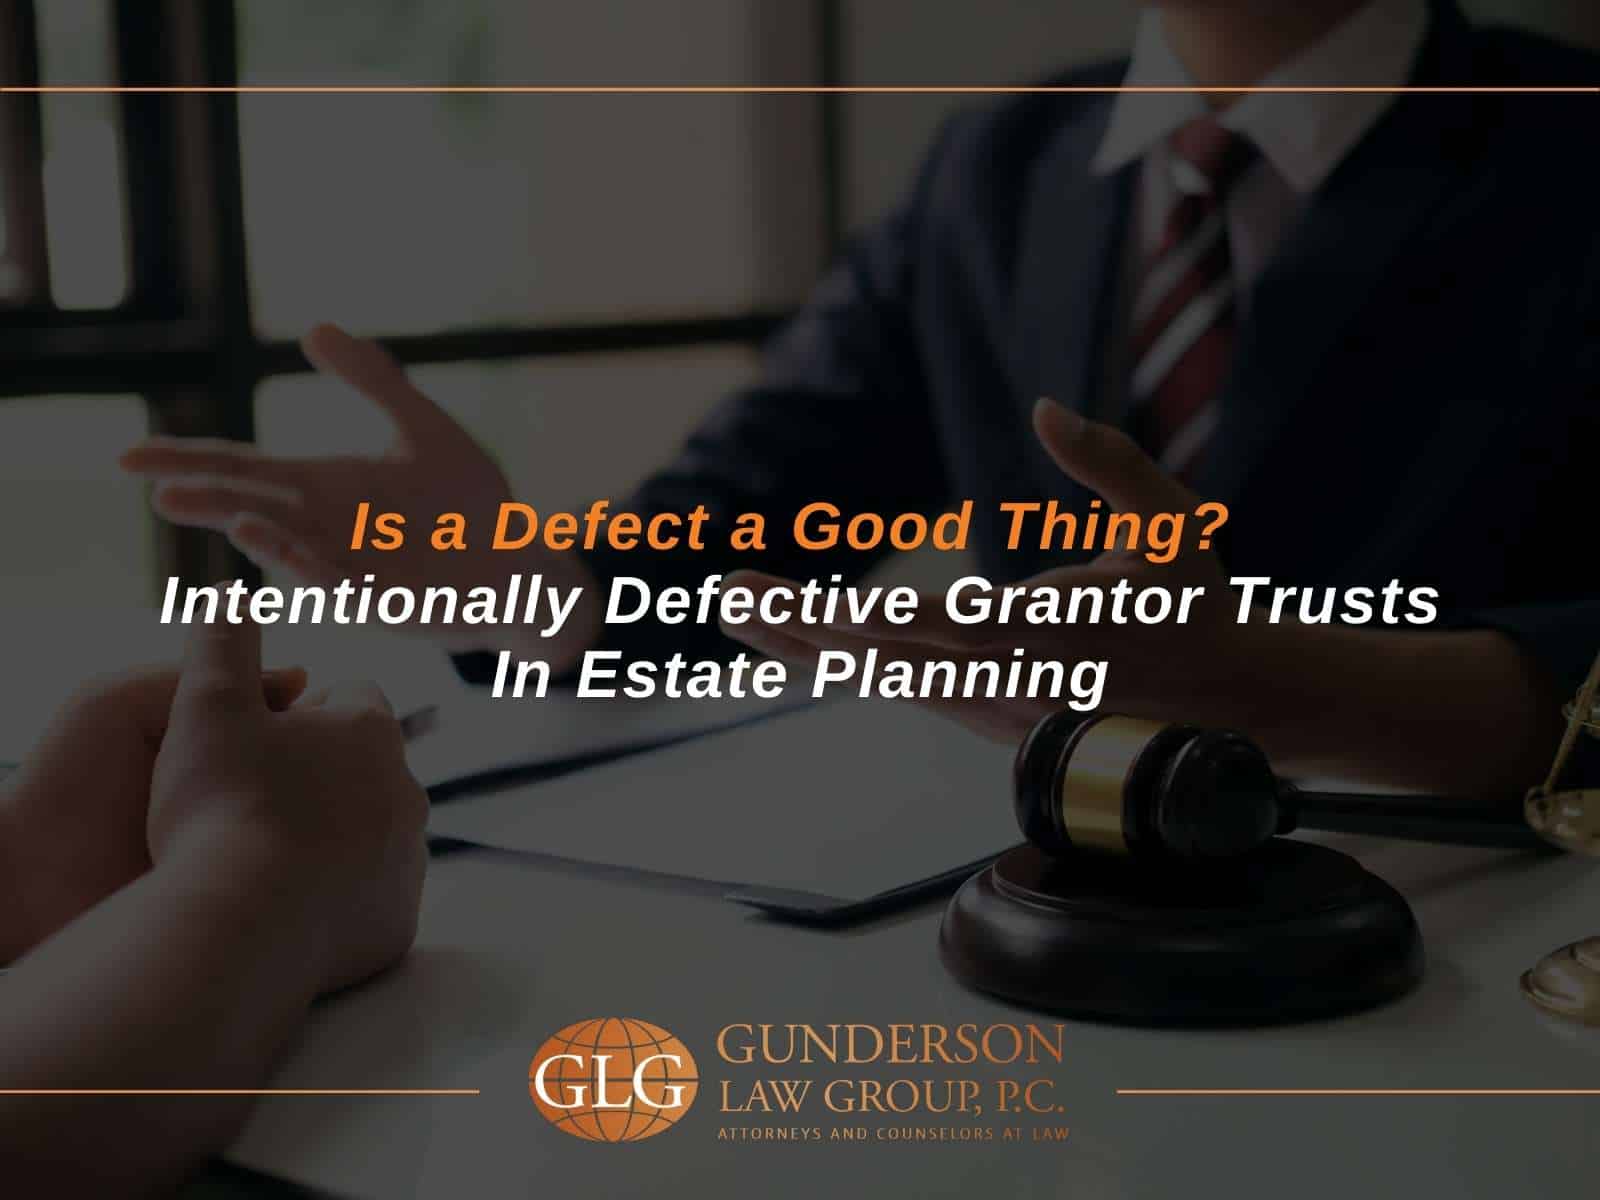 Is a Defect a Good Thing? Intentionally Defective Grantor Trusts in Estate Planning